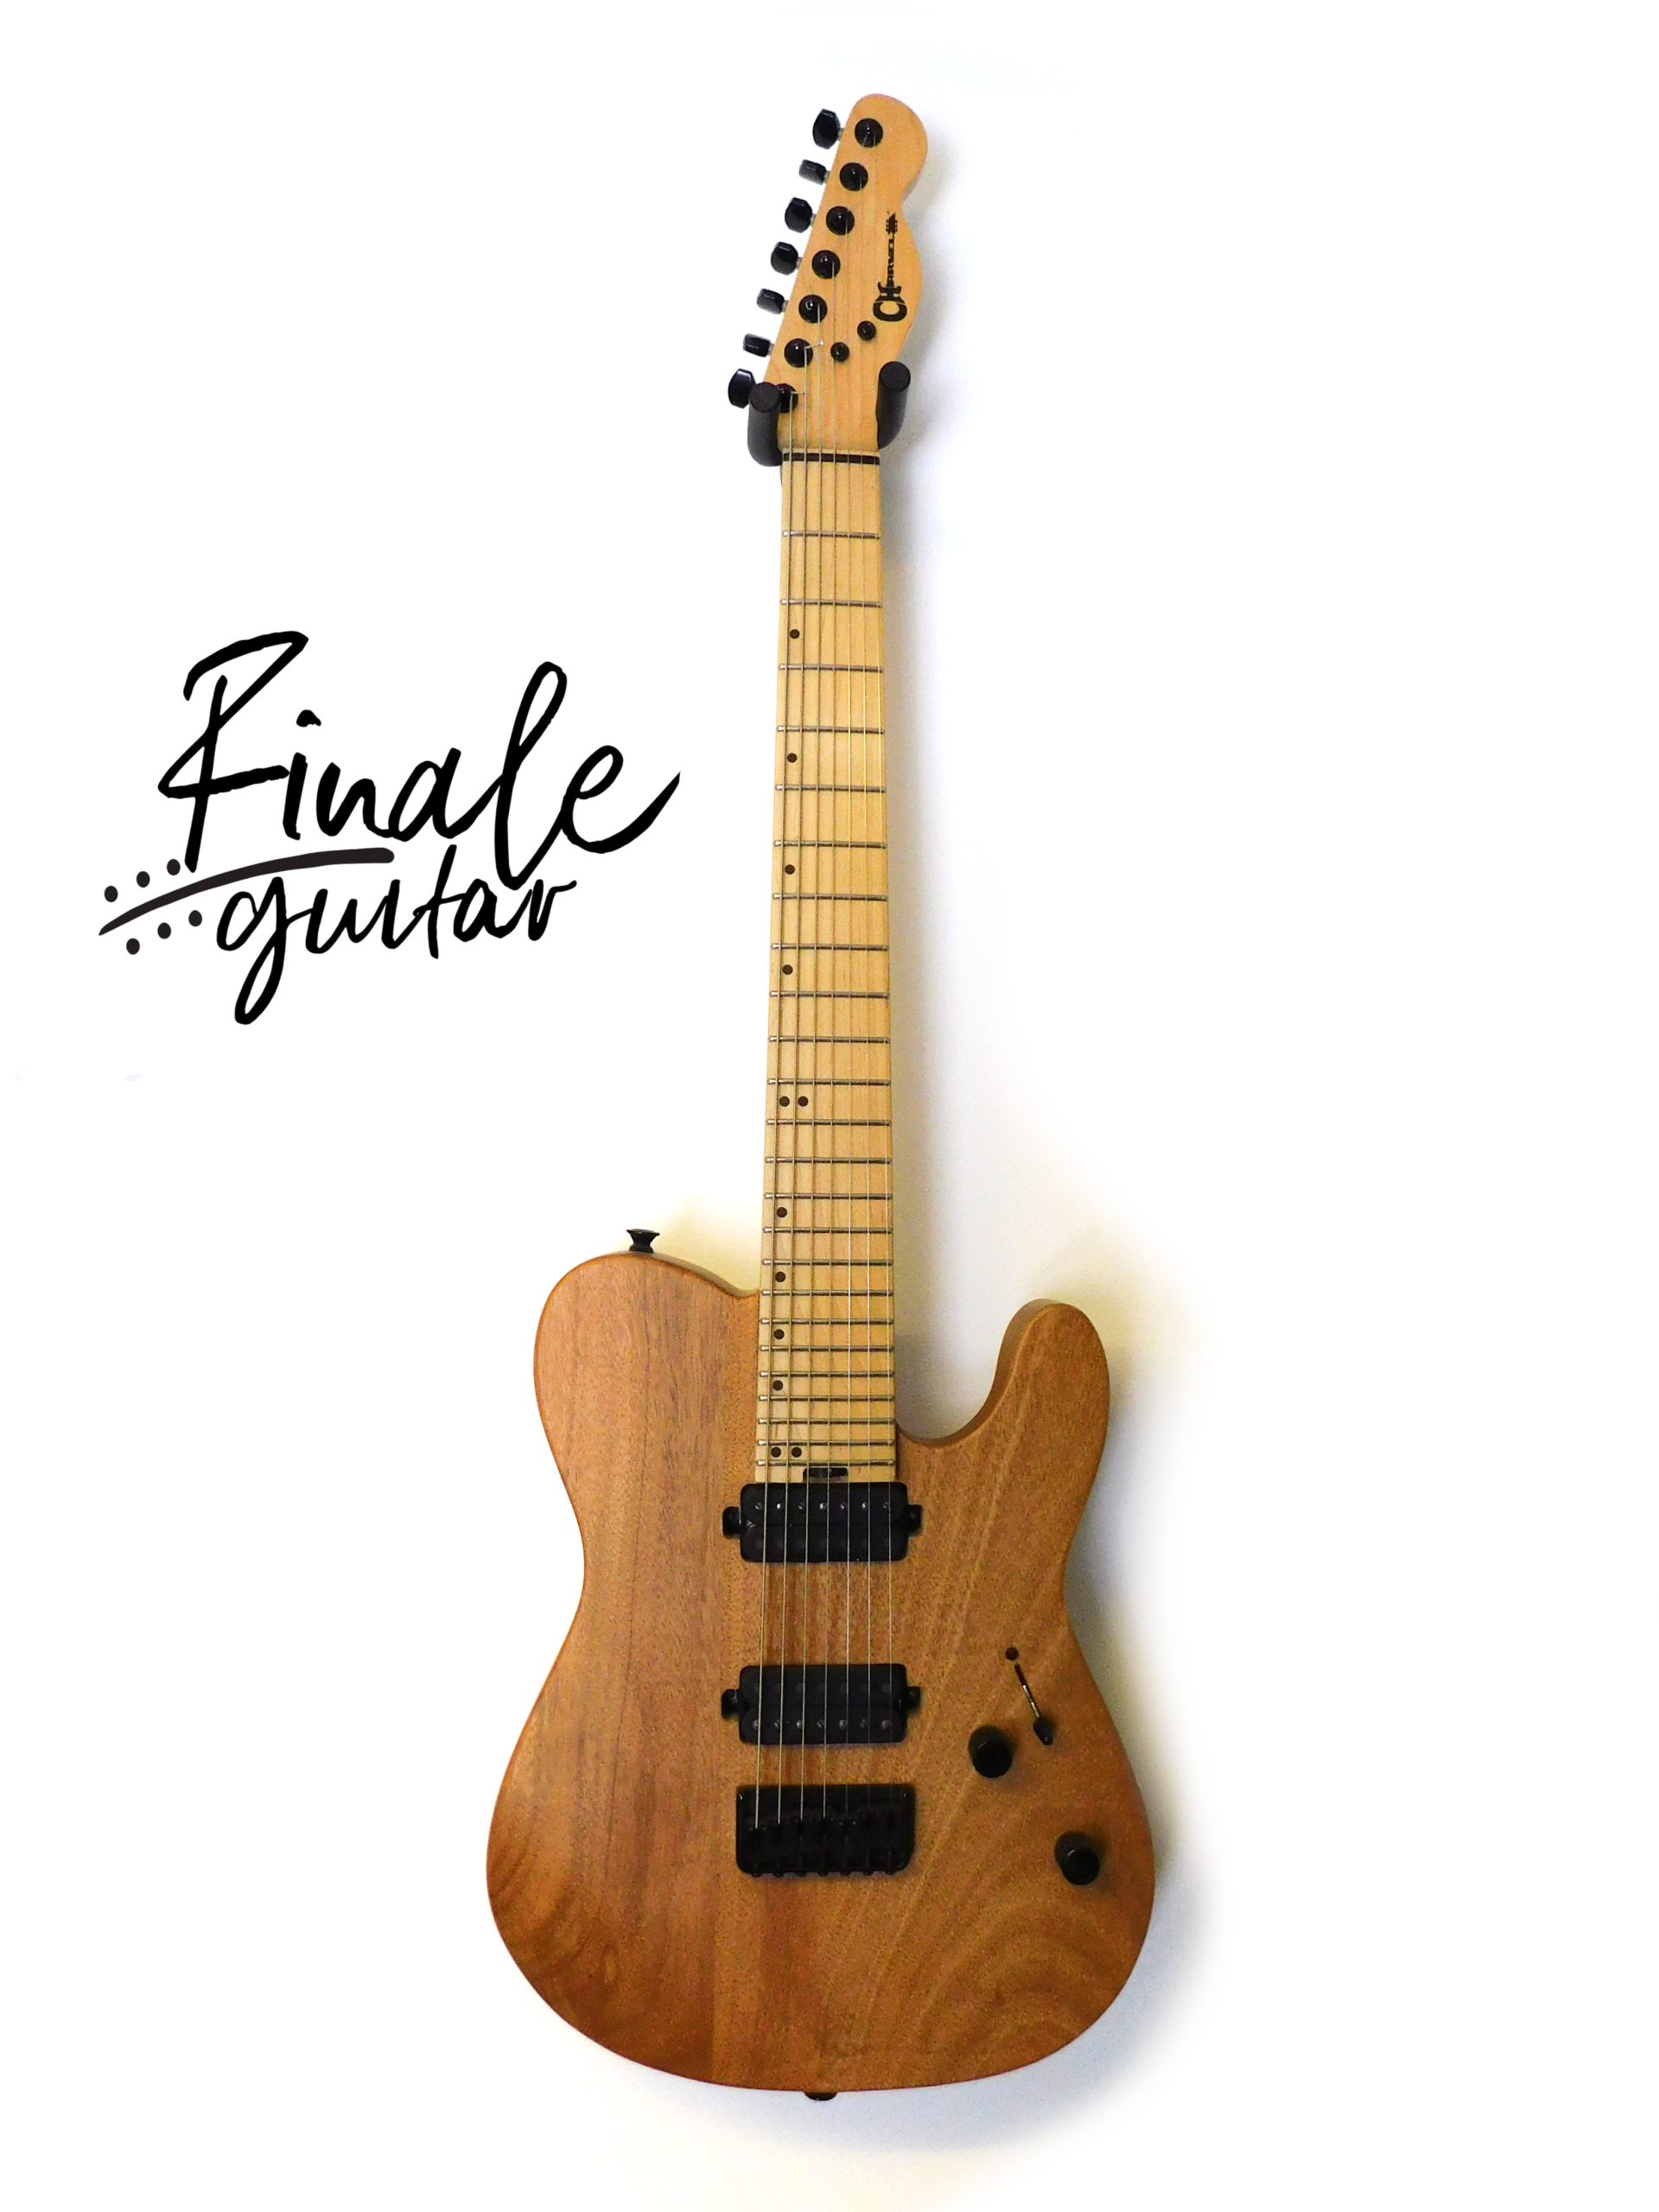 Charvel ProMod Sans Dimas 7 string with Seymour Duncan Sentient and Nazgul pickups for sale in our Sheffield guitar shop, Finale Guitar